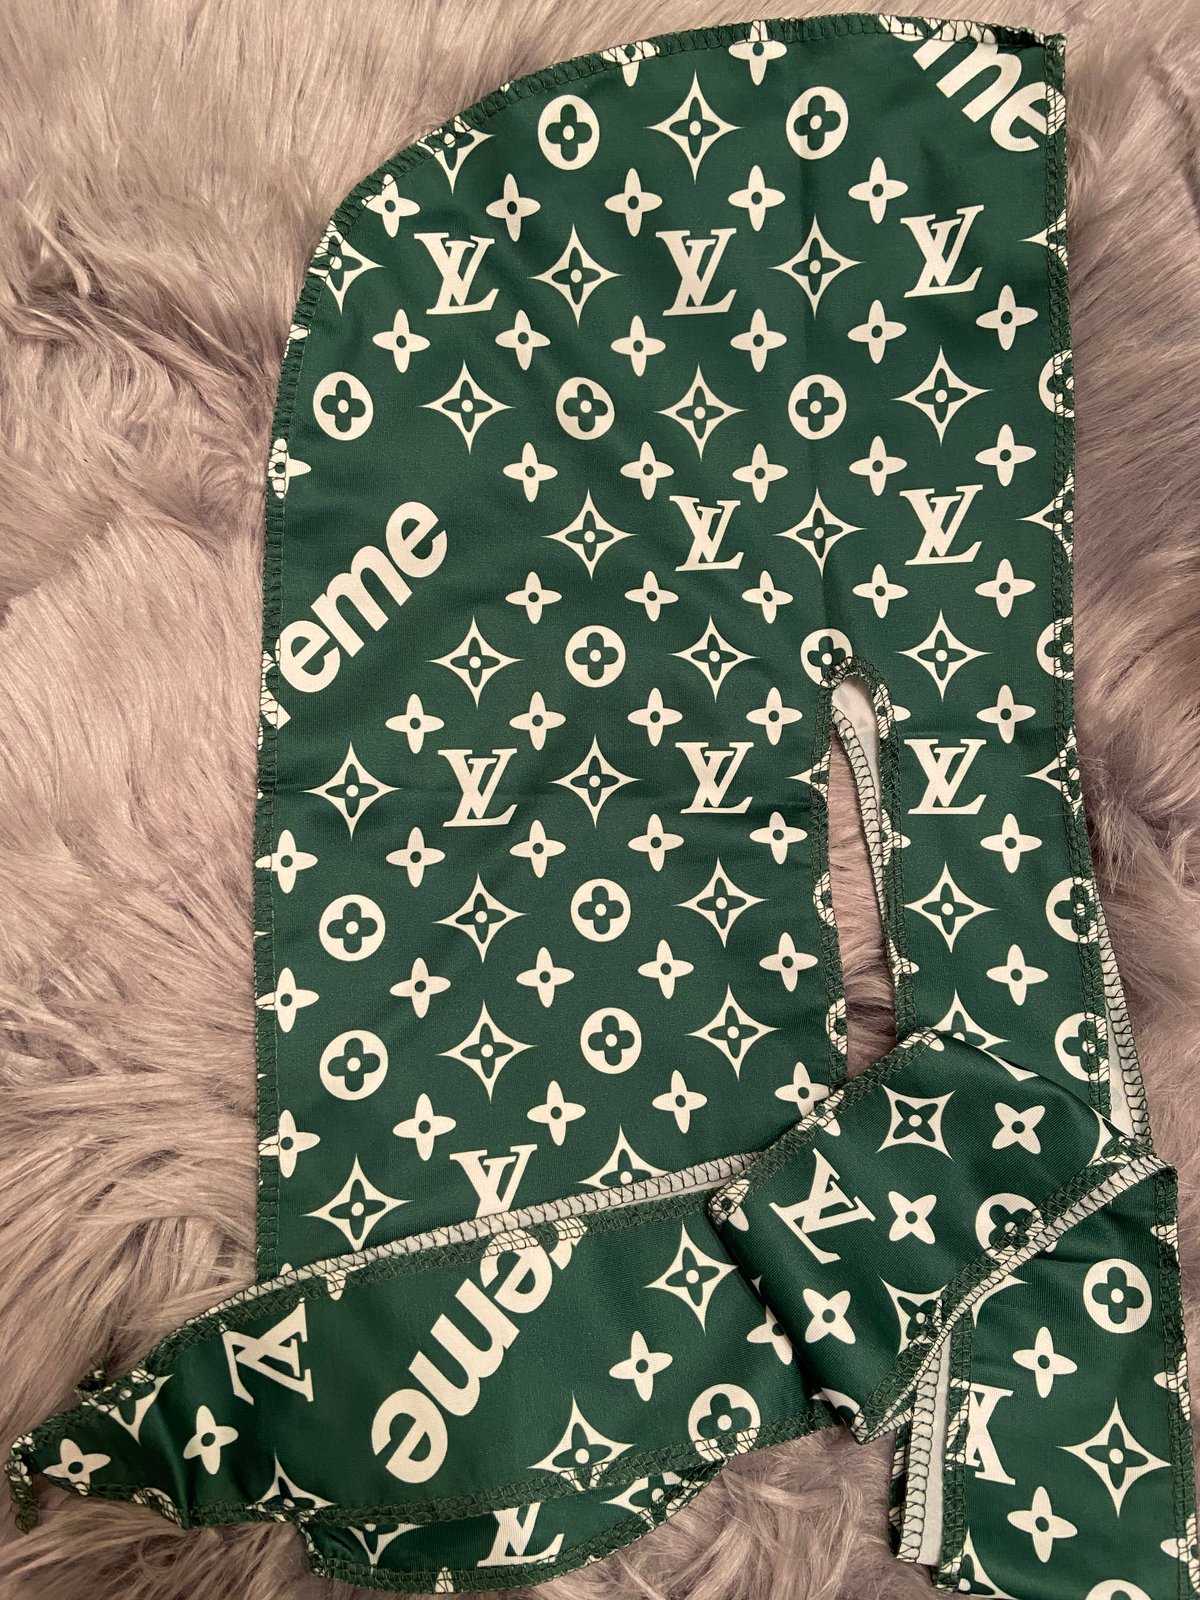 Green And White Lv Durag  Natural Resource Department